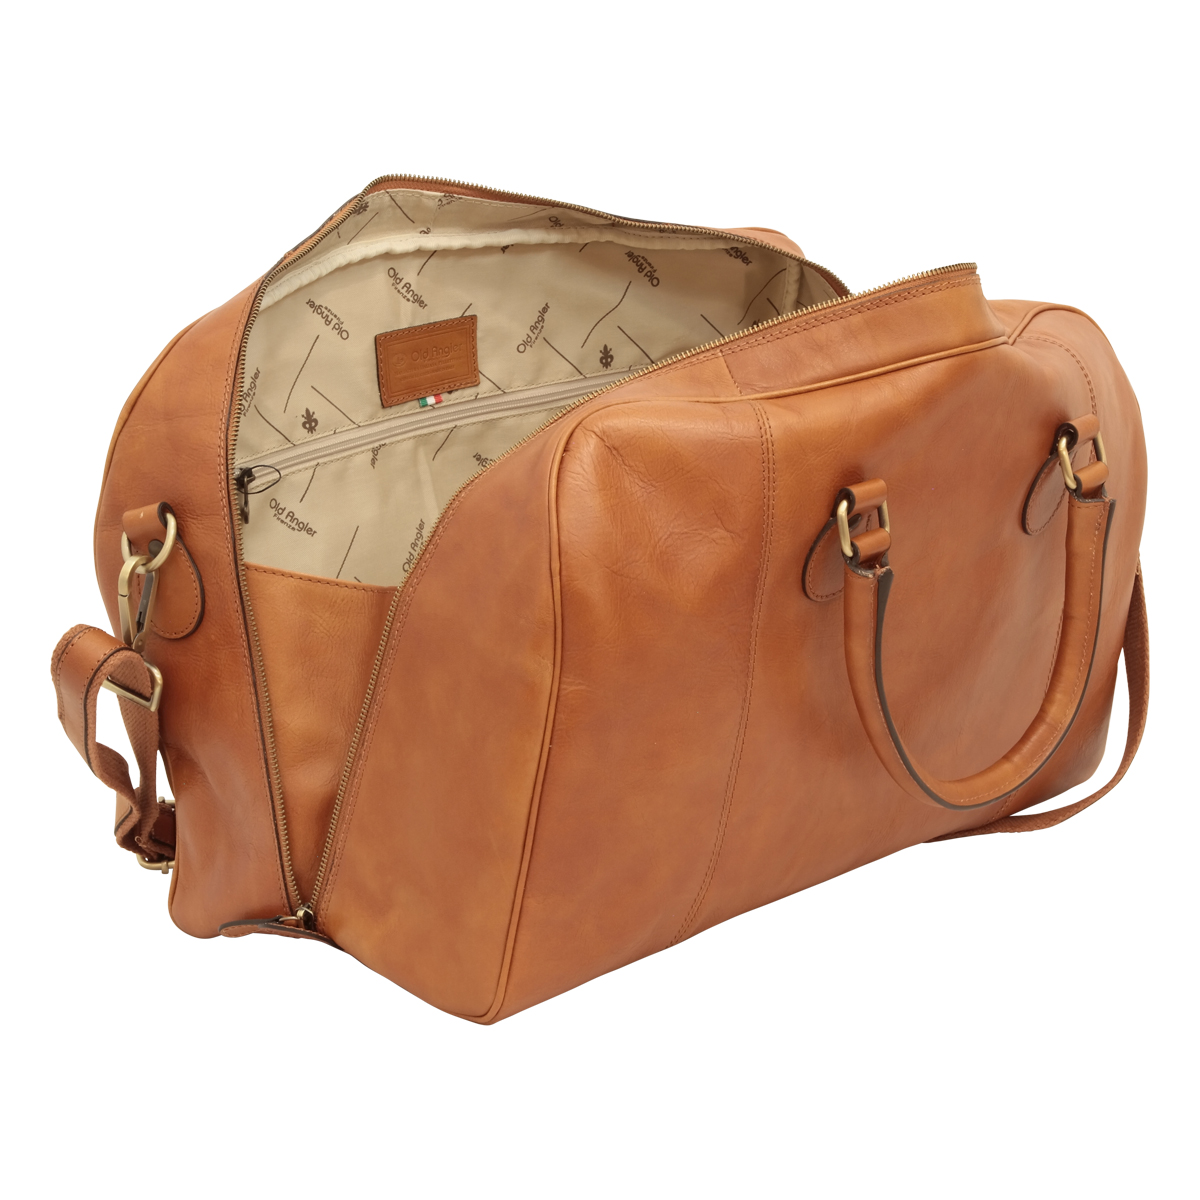 Leather Duffel Bag - Colonial | 404289CO UK | Old Angler Firenze